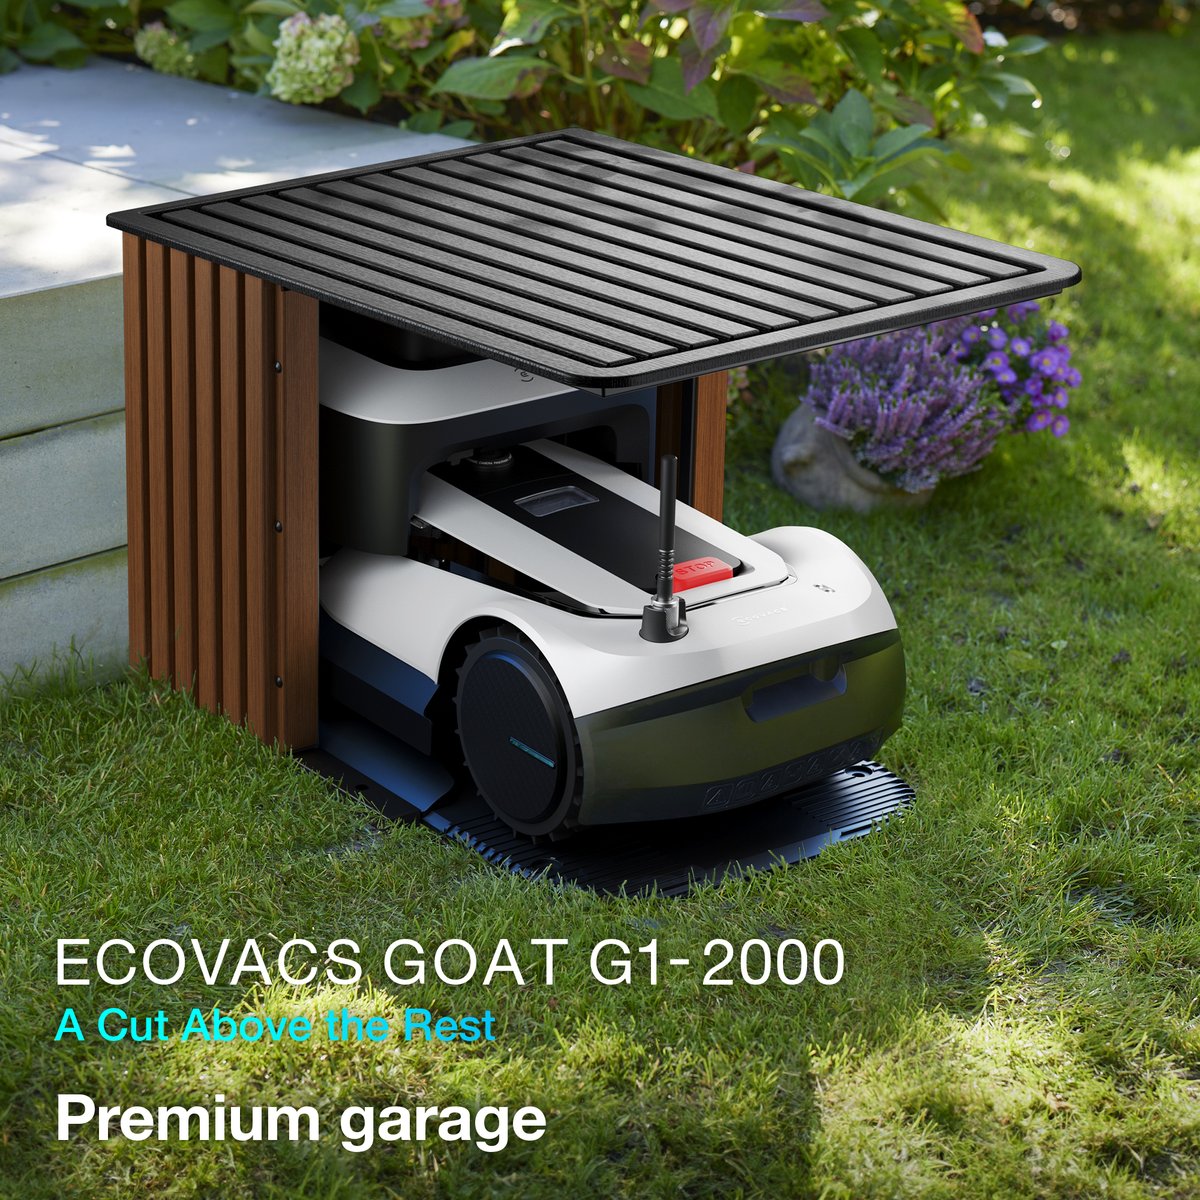 Find the perfect ECOVACS GOAT G1 for any garden size 🏡! 🐐 Wire-Free Setup & Mowing 🐐 Smart Path Planning 🐐 AIVI 3D Obstacle Avoidance 🐐 G1-2000 includes Premium Garage #ECOVACSxBALLACK #GOATG1 #roboticlawnmower